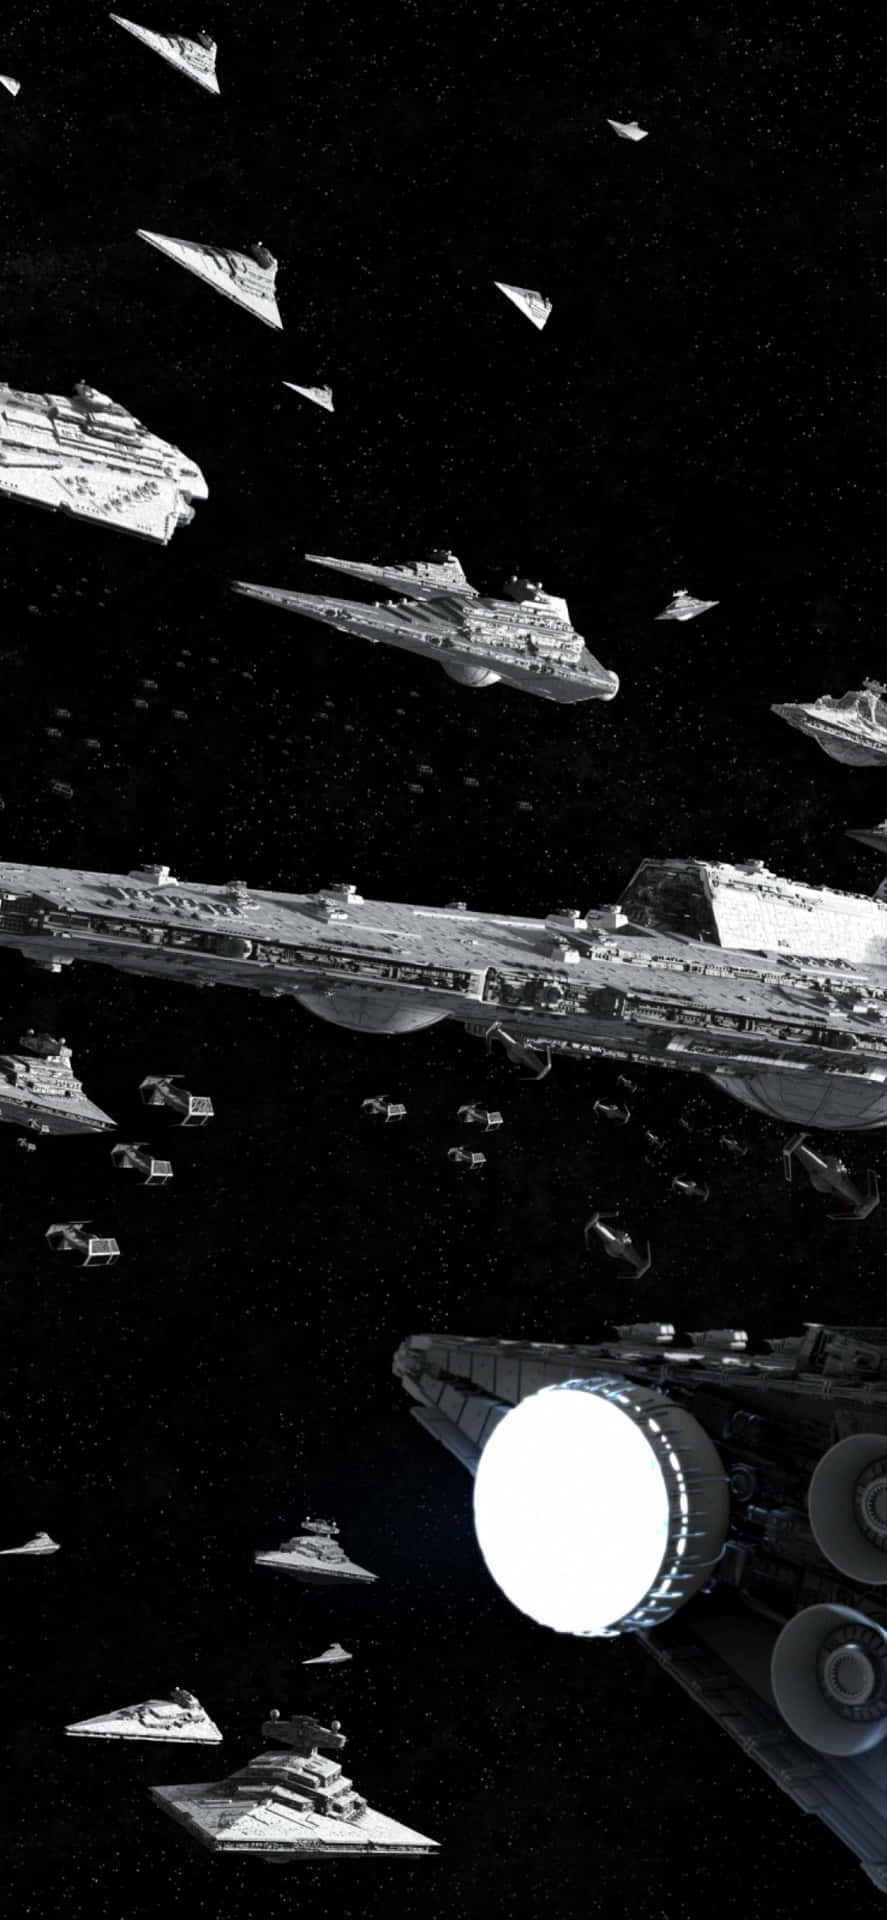 Explore the Galaxy, Anywhere Anytime with the Star Wars Phone Wallpaper